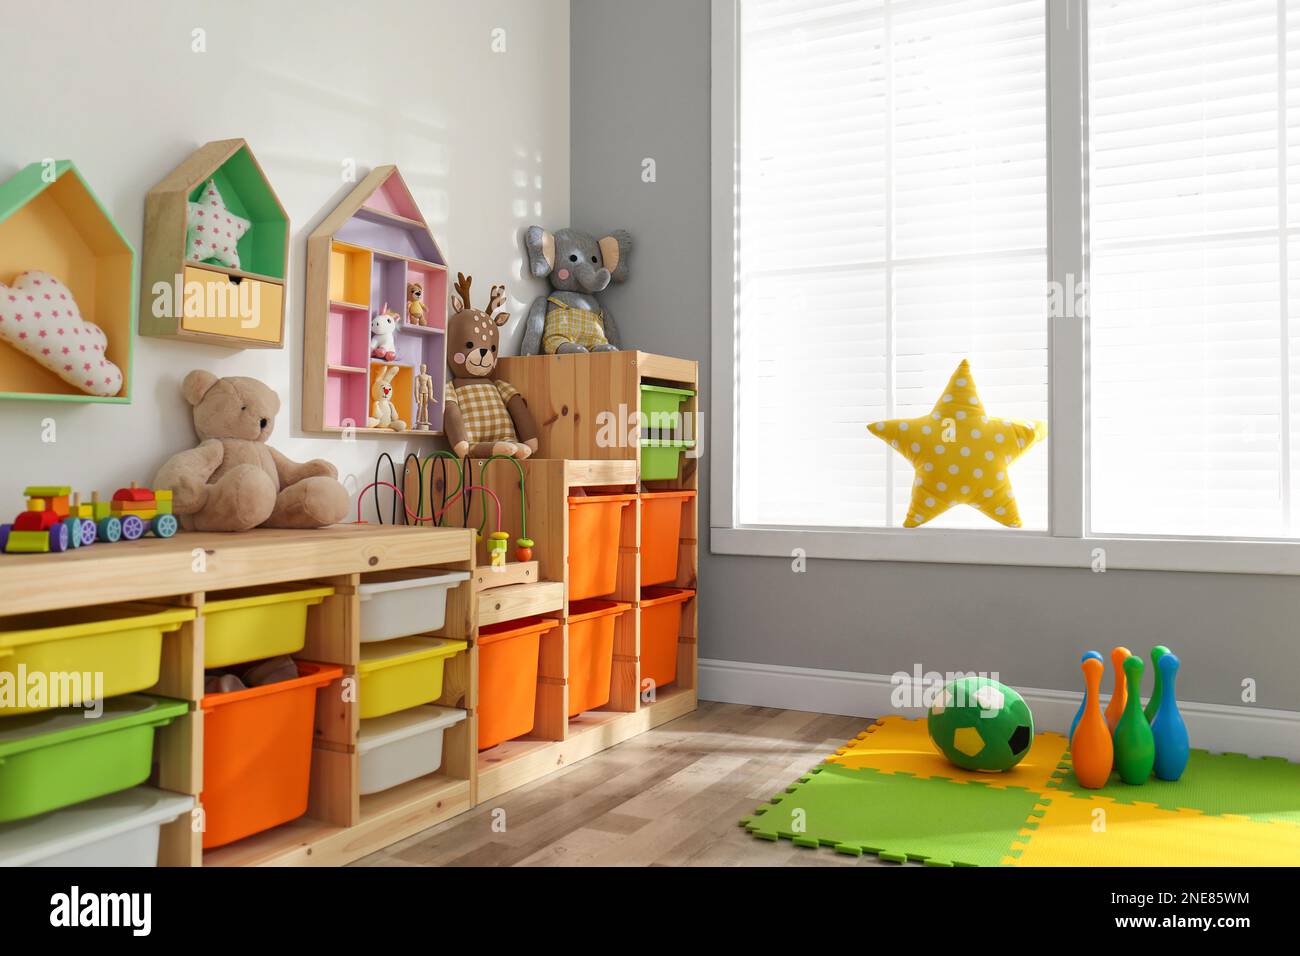 Stylish playroom interior with shelving unit and different soft toys Stock Photo